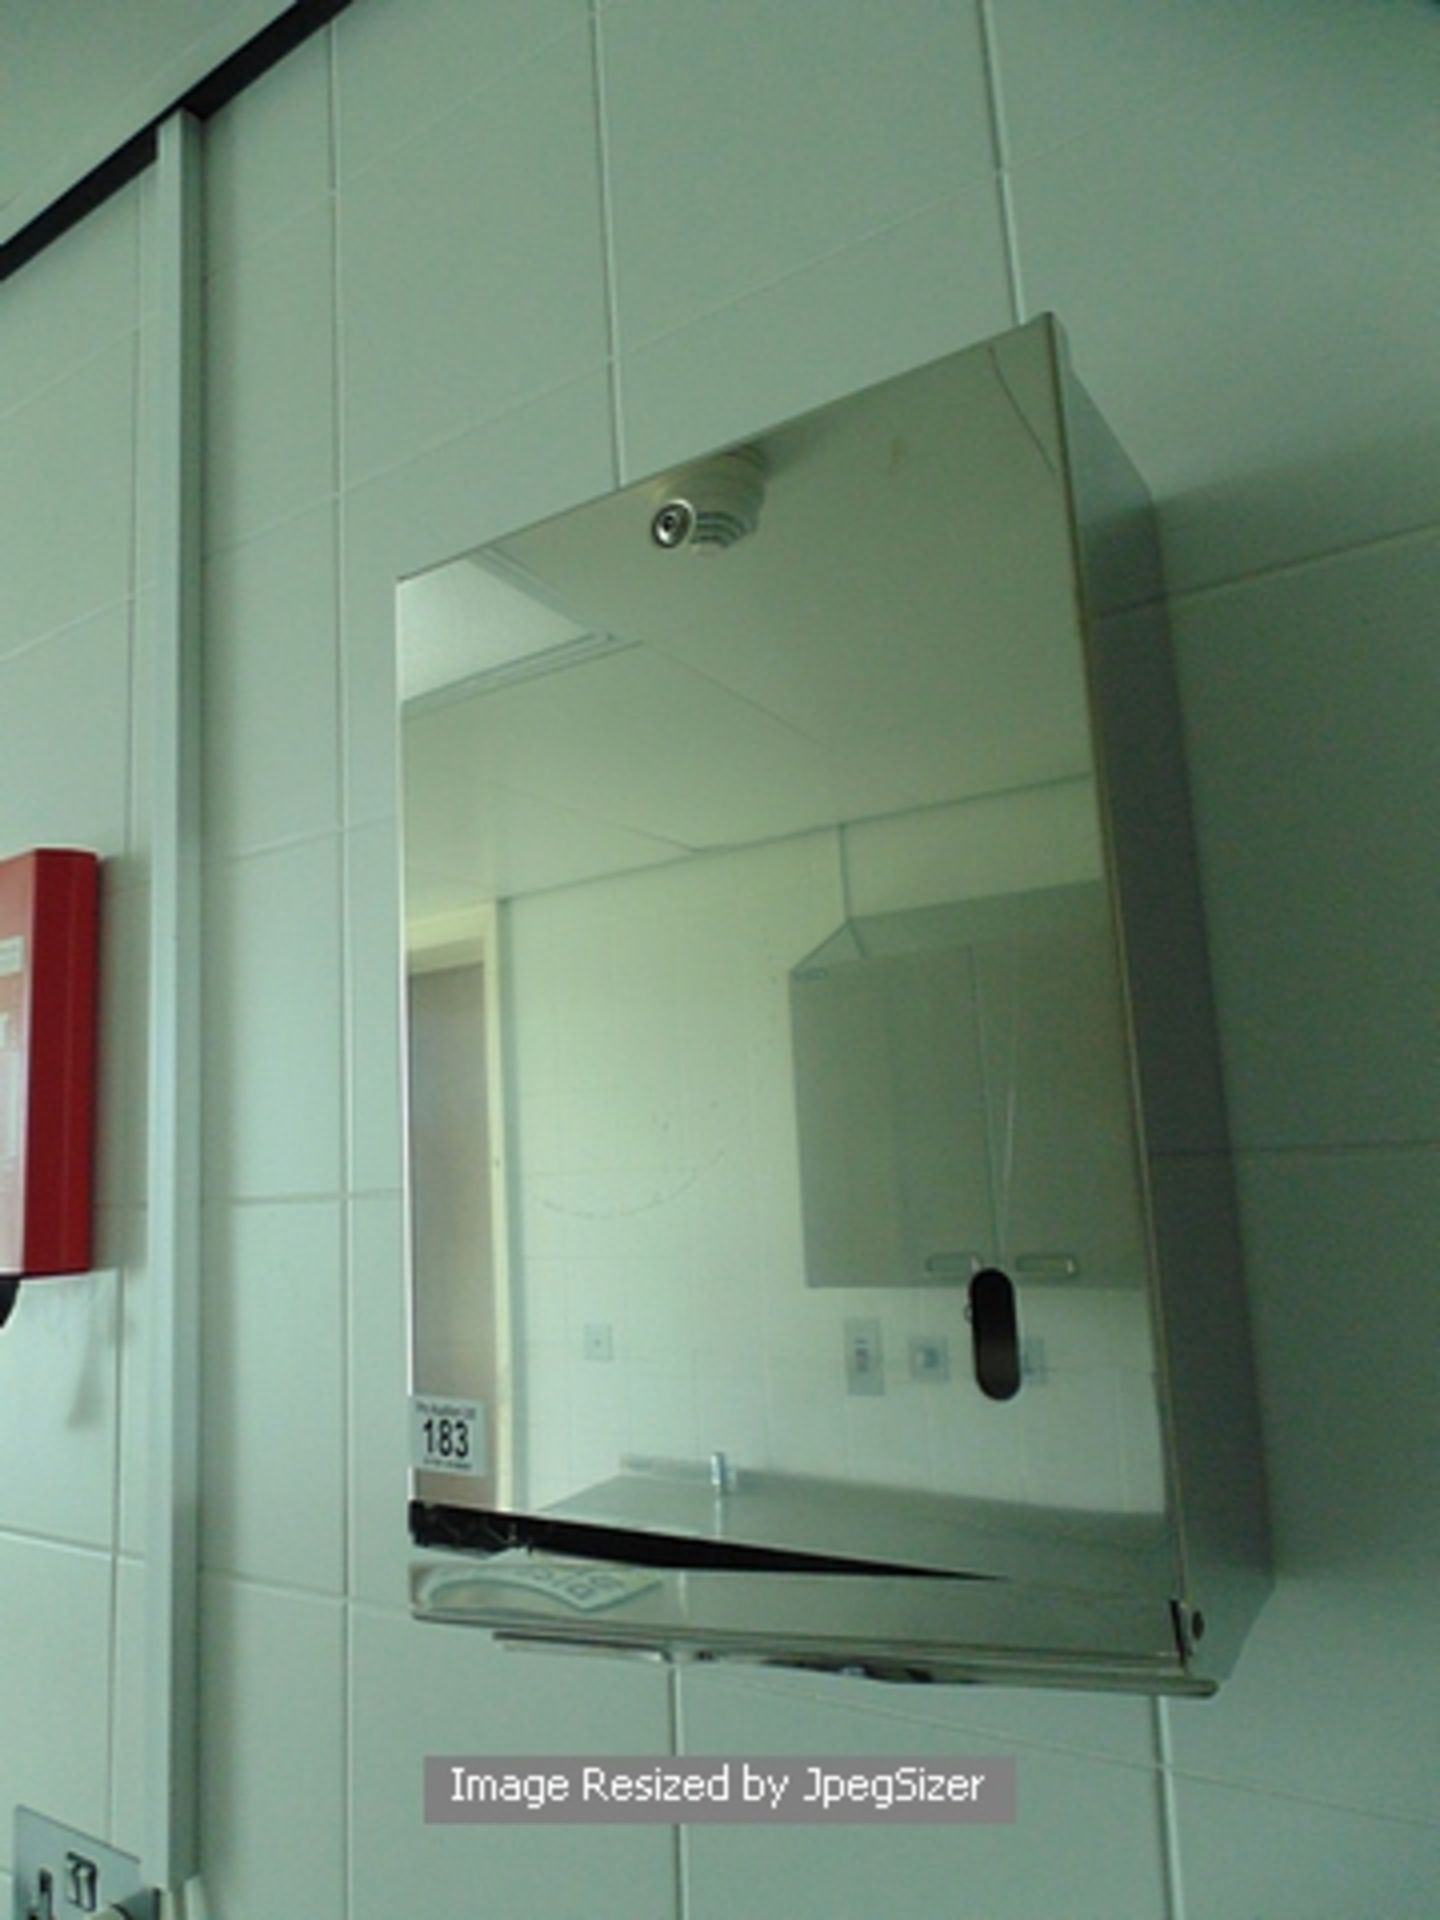 Stainless steel wall mount paper towel dispenser - Image 2 of 2